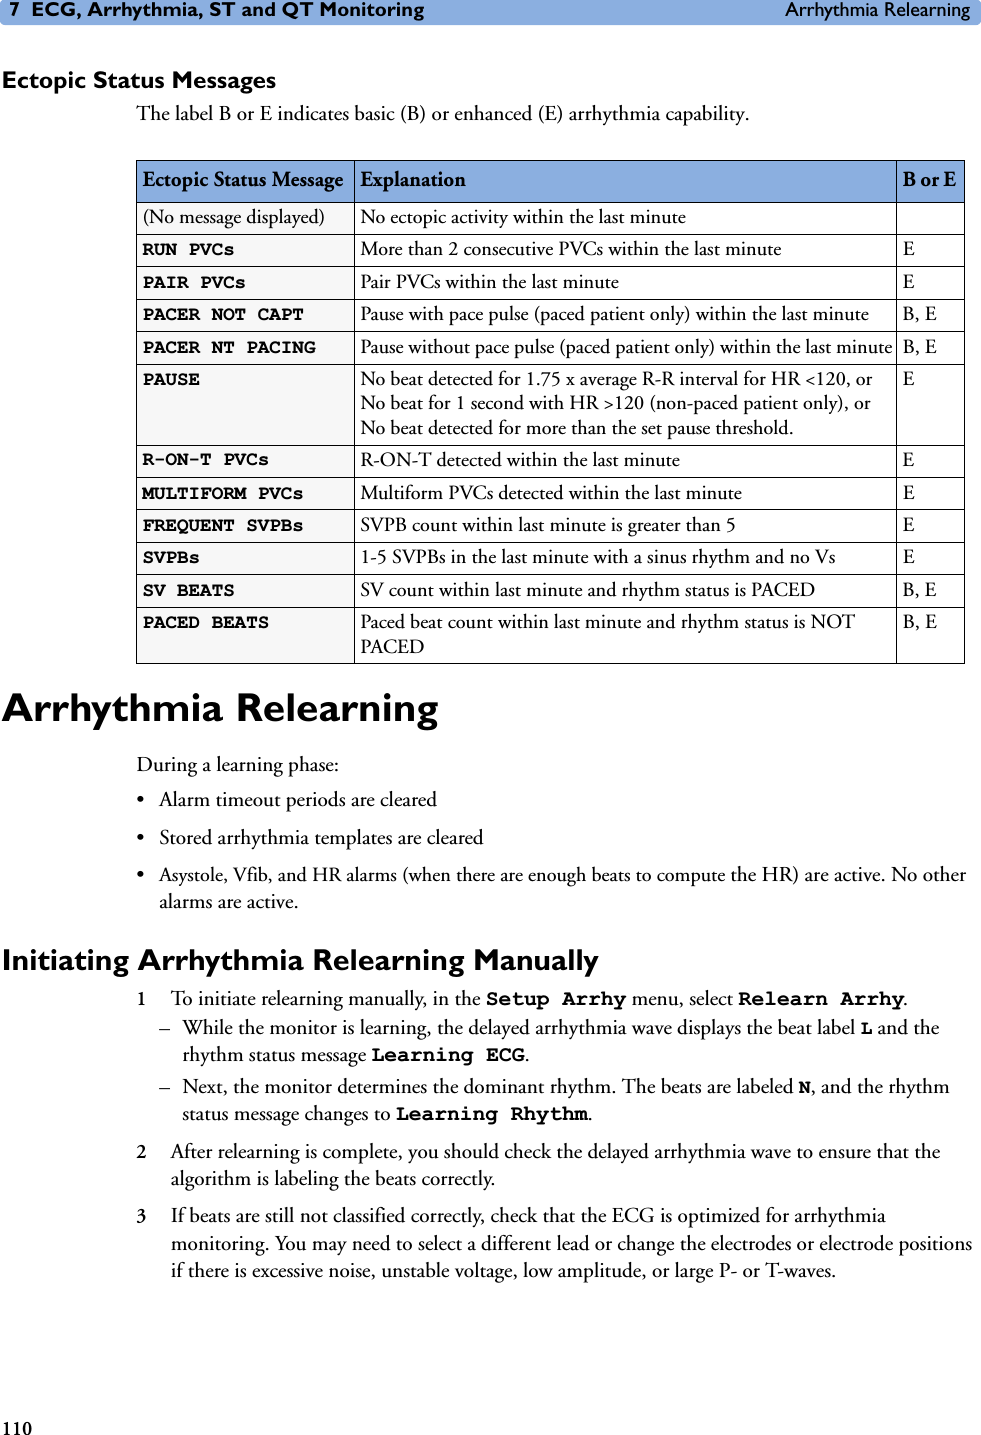 7 ECG, Arrhythmia, ST and QT Monitoring Arrhythmia Relearning110Ectopic Status MessagesThe label B or E indicates basic (B) or enhanced (E) arrhythmia capability.Arrhythmia RelearningDuring a learning phase:• Alarm timeout periods are cleared• Stored arrhythmia templates are cleared•Asystole, Vfib, and HR alarms (when there are enough beats to compute the HR) are active. No other alarms are active.Initiating Arrhythmia Relearning Manually1To initiate relearning manually, in the Setup Arrhy menu, select Relearn Arrhy.– While the monitor is learning, the delayed arrhythmia wave displays the beat label L and the rhythm status message Learning ECG. – Next, the monitor determines the dominant rhythm. The beats are labeled N, and the rhythm status message changes to Learning Rhythm.2After relearning is complete, you should check the delayed arrhythmia wave to ensure that the algorithm is labeling the beats correctly. 3If beats are still not classified correctly, check that the ECG is optimized for arrhythmia monitoring. You may need to select a different lead or change the electrodes or electrode positions if there is excessive noise, unstable voltage, low amplitude, or large P- or T-waves. Ectopic Status Message Explanation B or E (No message displayed) No ectopic activity within the last minuteRUN PVCs  More than 2 consecutive PVCs within the last minute EPAIR PVCs  Pair PVCs within the last minute EPACER NOT CAPT  Pause with pace pulse (paced patient only) within the last minute B, EPACER NT PACING  Pause without pace pulse (paced patient only) within the last minute B, EPAUSE  No beat detected for 1.75 x average R-R interval for HR &lt;120, or No beat for 1 second with HR &gt;120 (non-paced patient only), or No beat detected for more than the set pause threshold.ER-ON-T PVCs R-ON-T detected within the last minute EMULTIFORM PVCs  Multiform PVCs detected within the last minute EFREQUENT SVPBs  SVPB count within last minute is greater than 5 ESVPBs  1-5 SVPBs in the last minute with a sinus rhythm and no Vs ESV BEATS  SV count within last minute and rhythm status is PACED B, EPACED BEATS  Paced beat count within last minute and rhythm status is NOT PACEDB, E